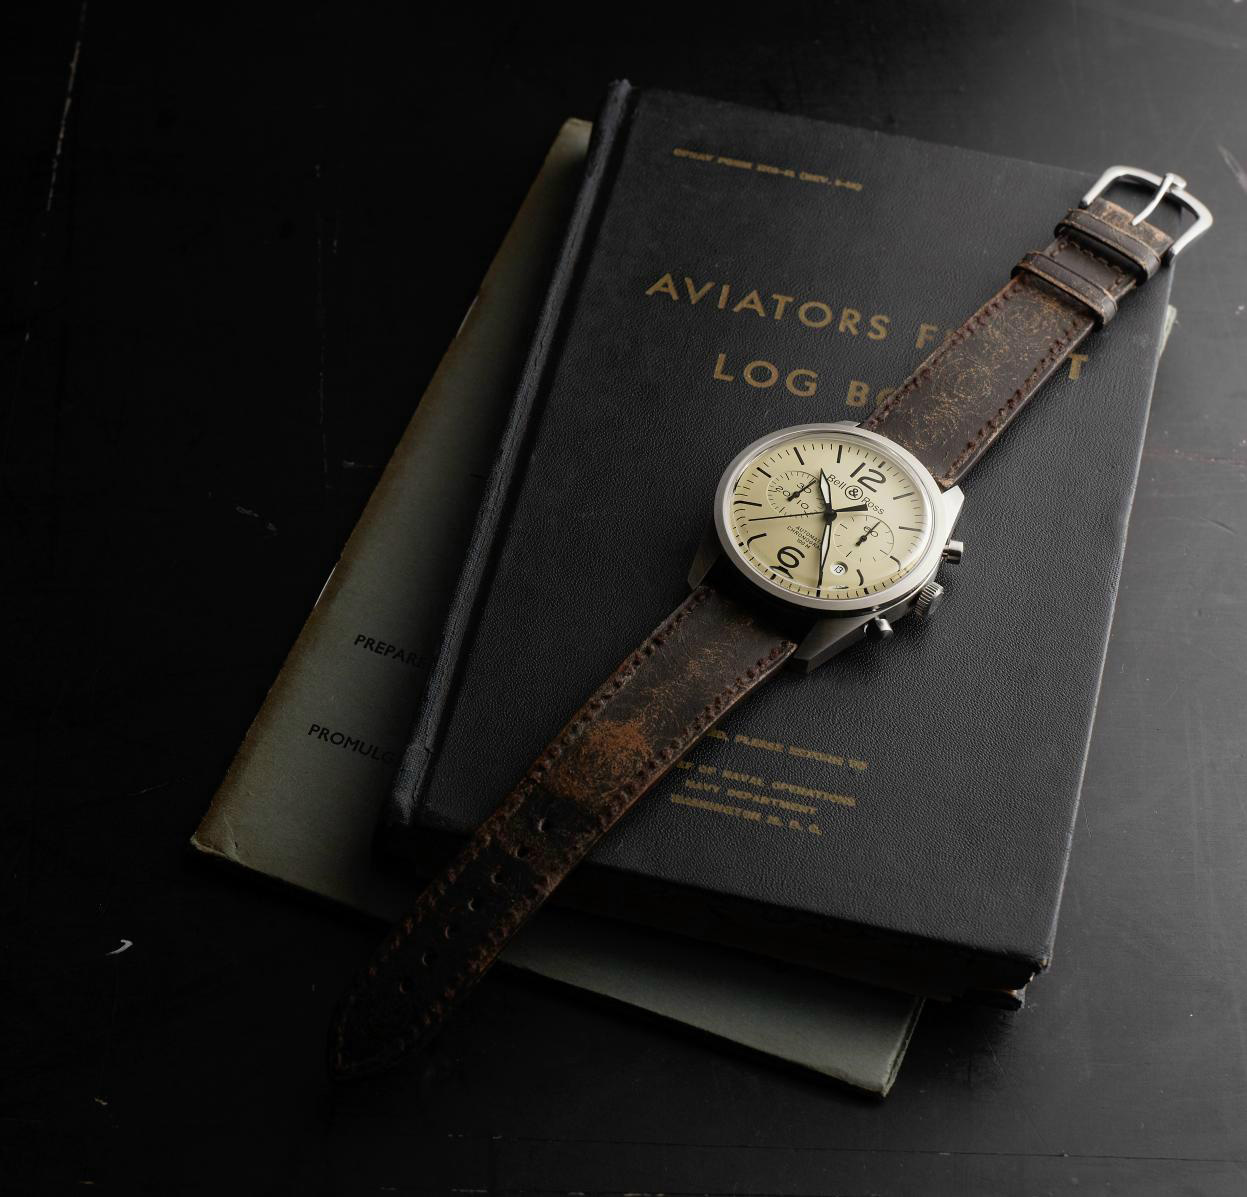 Bell & Ross Vintage Collection Timepiece